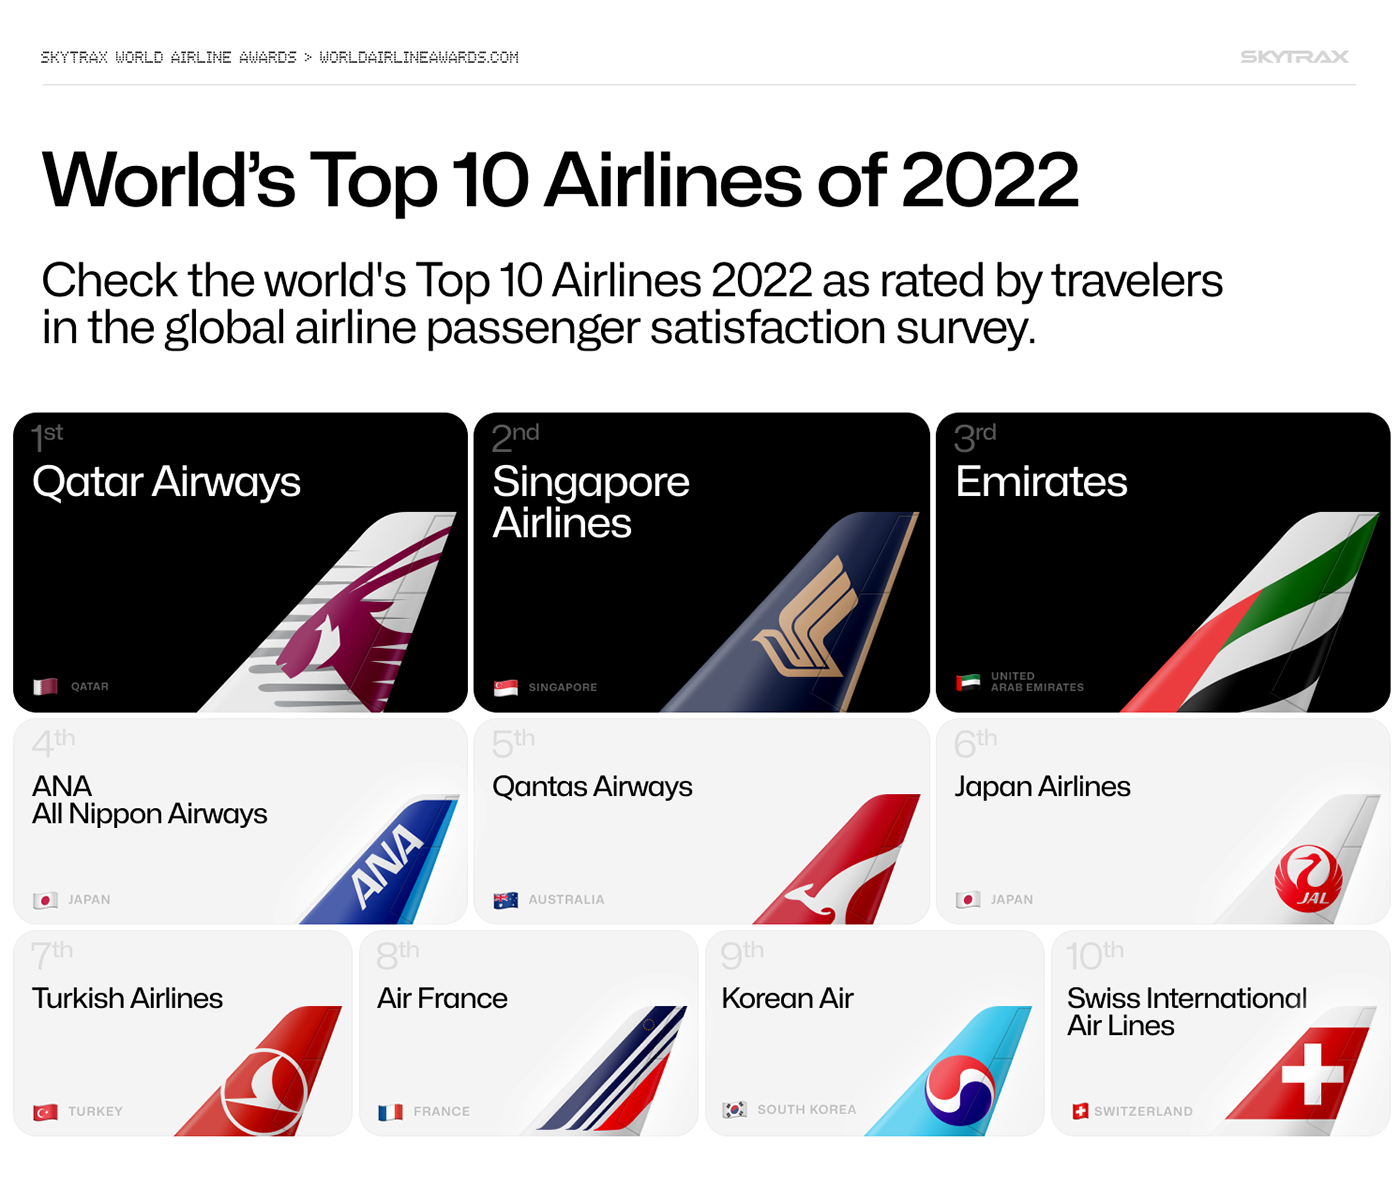 Skytrax Top 10 Airlines